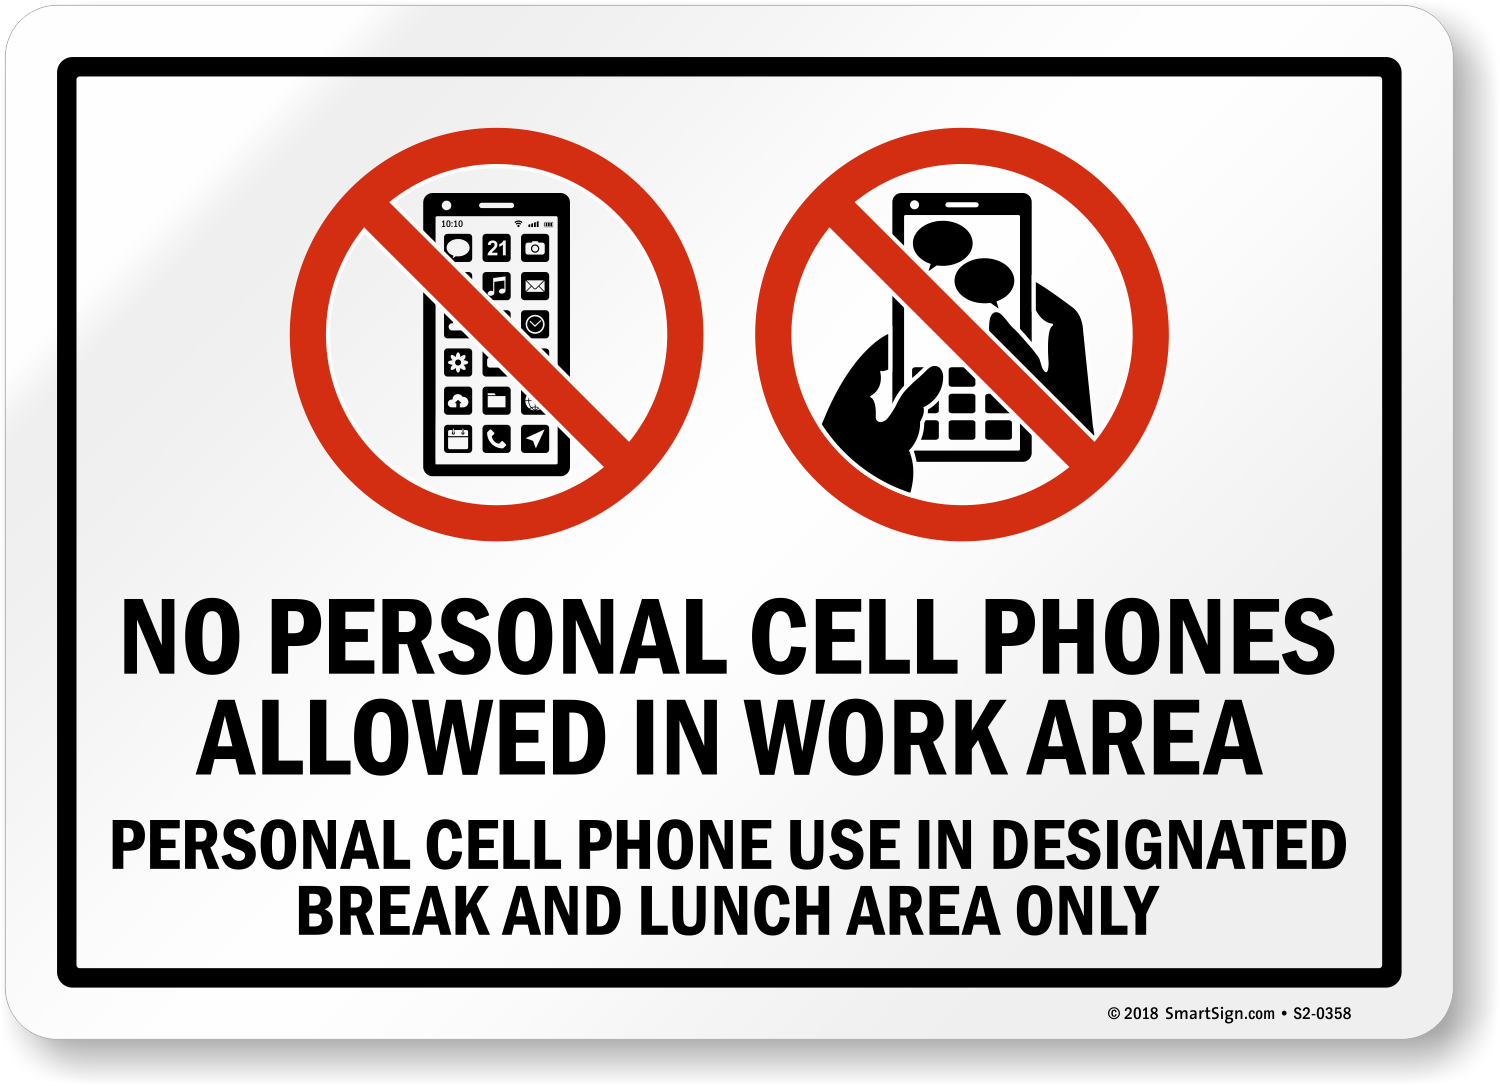 no-personal-cell-phones-allowed-in-work-area-sign-sku-s2-0358